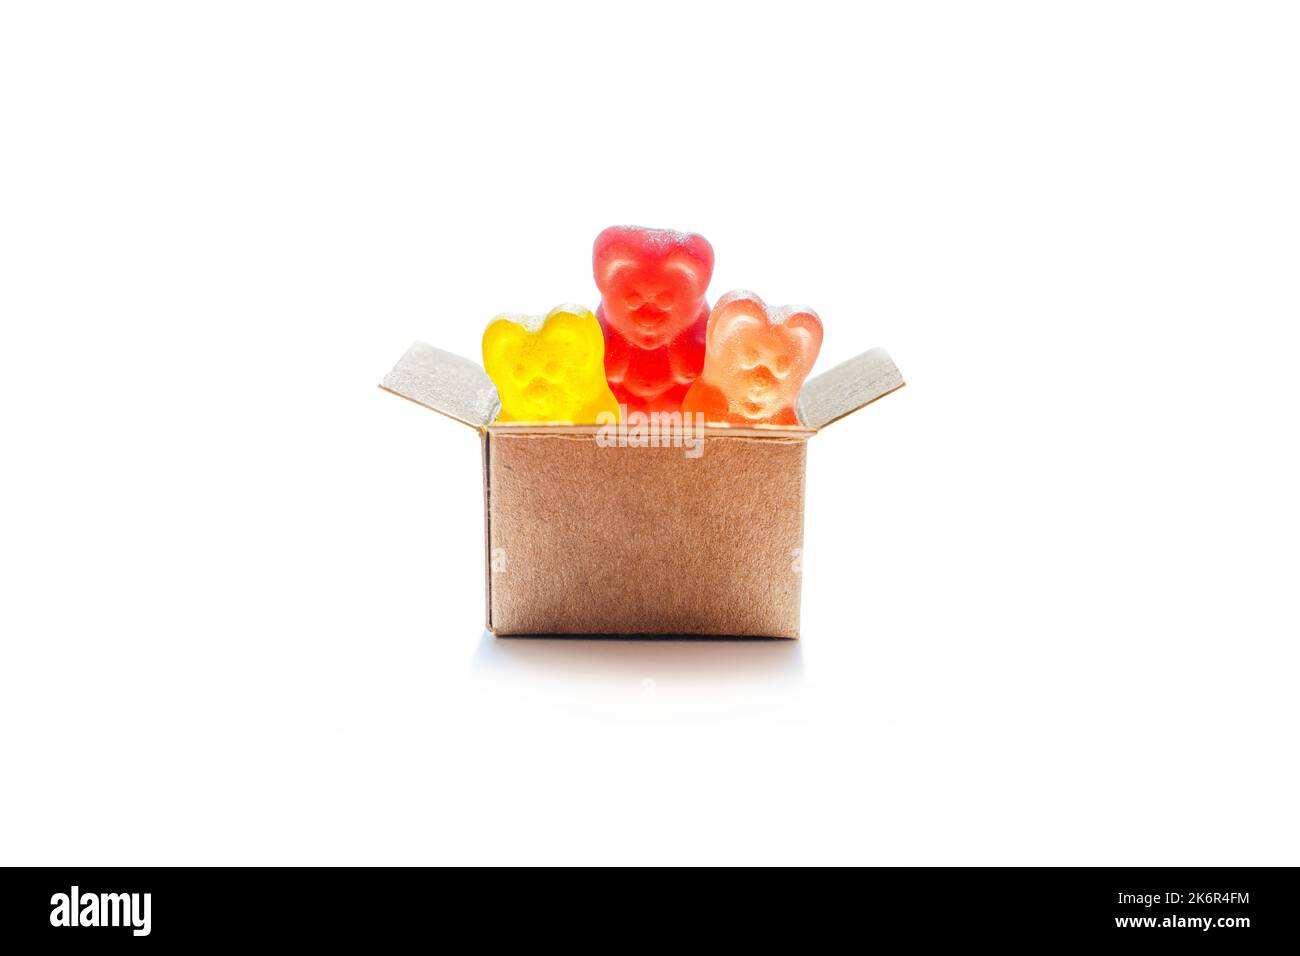 Miniature shipping box full of colorful gummy bears candies isolated on white background. Buying sweeties online. Stock Photo